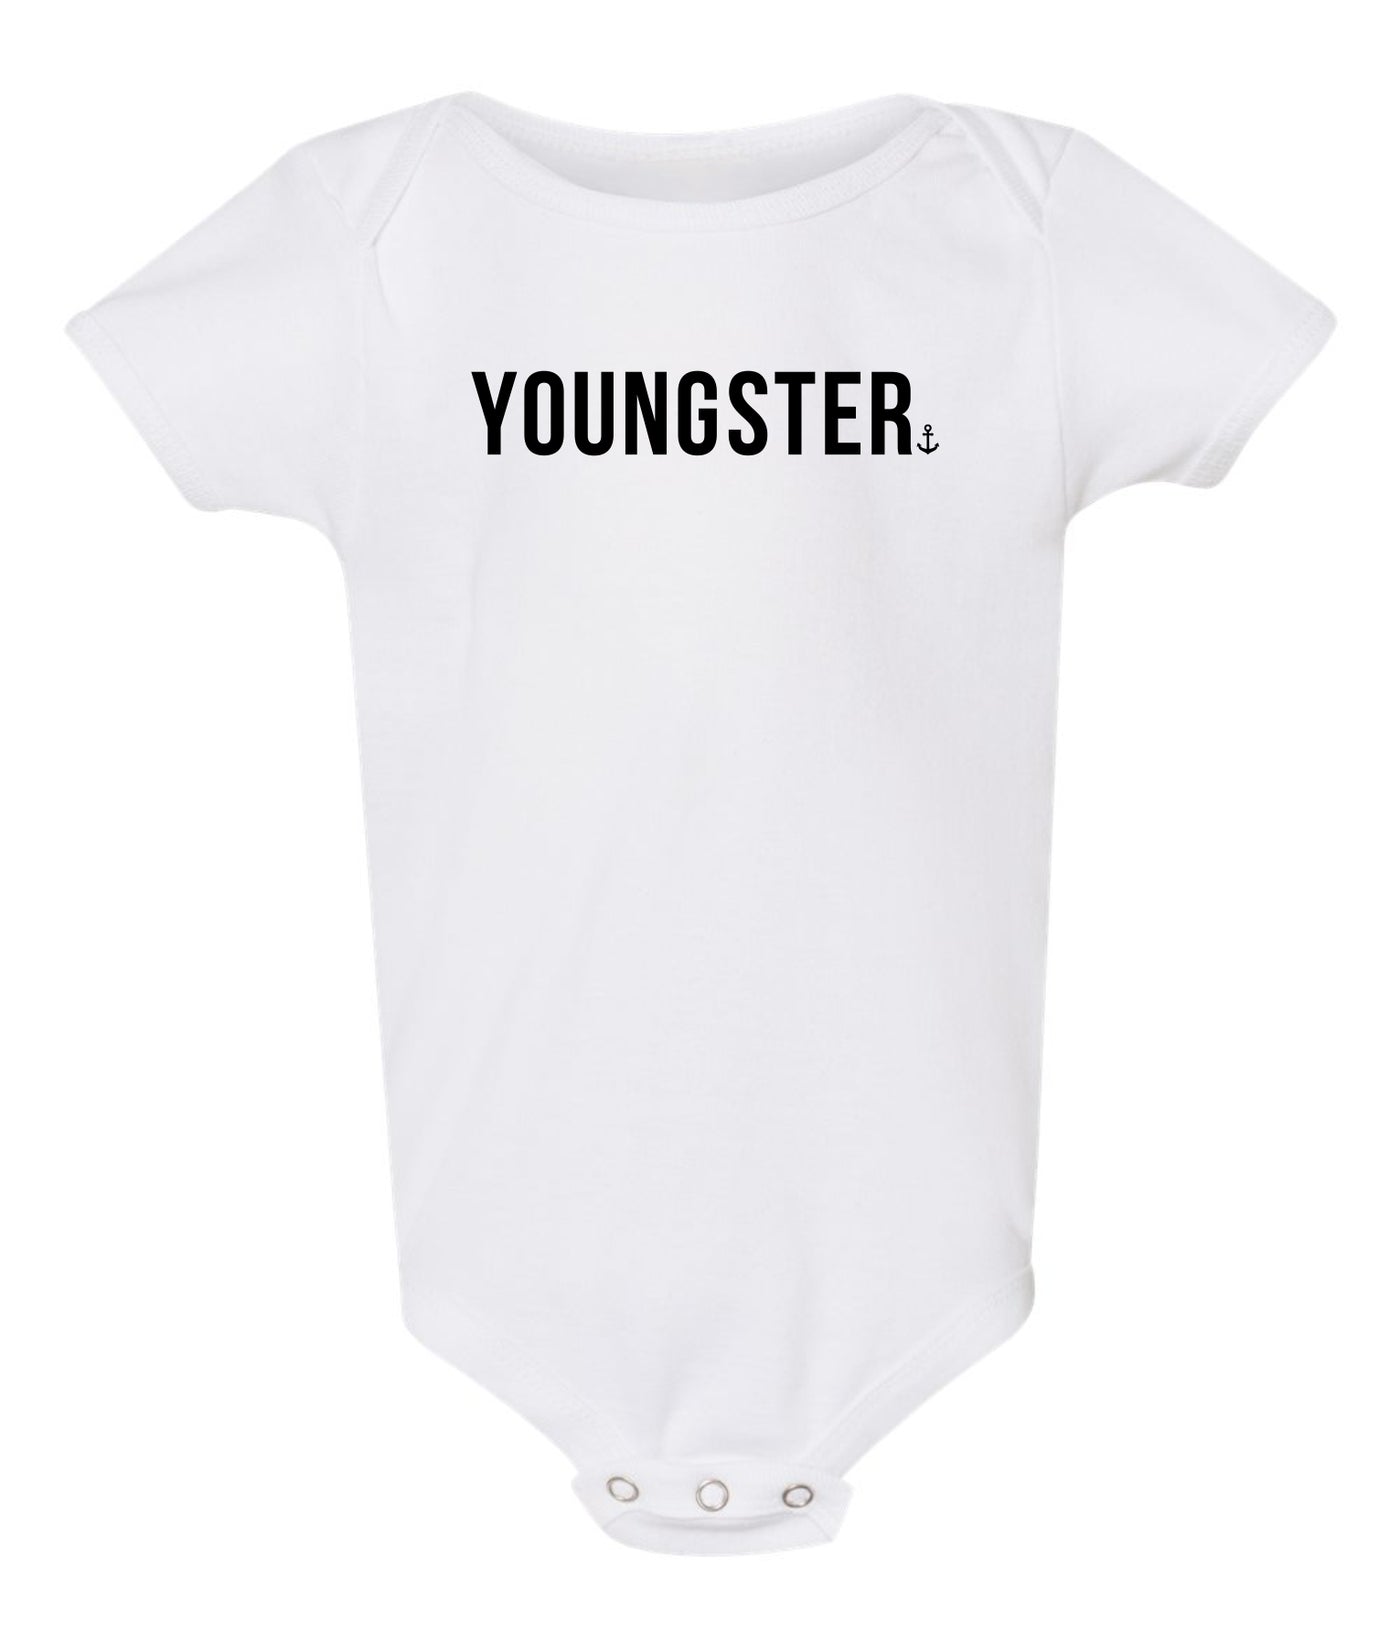 "Youngster" Onesie